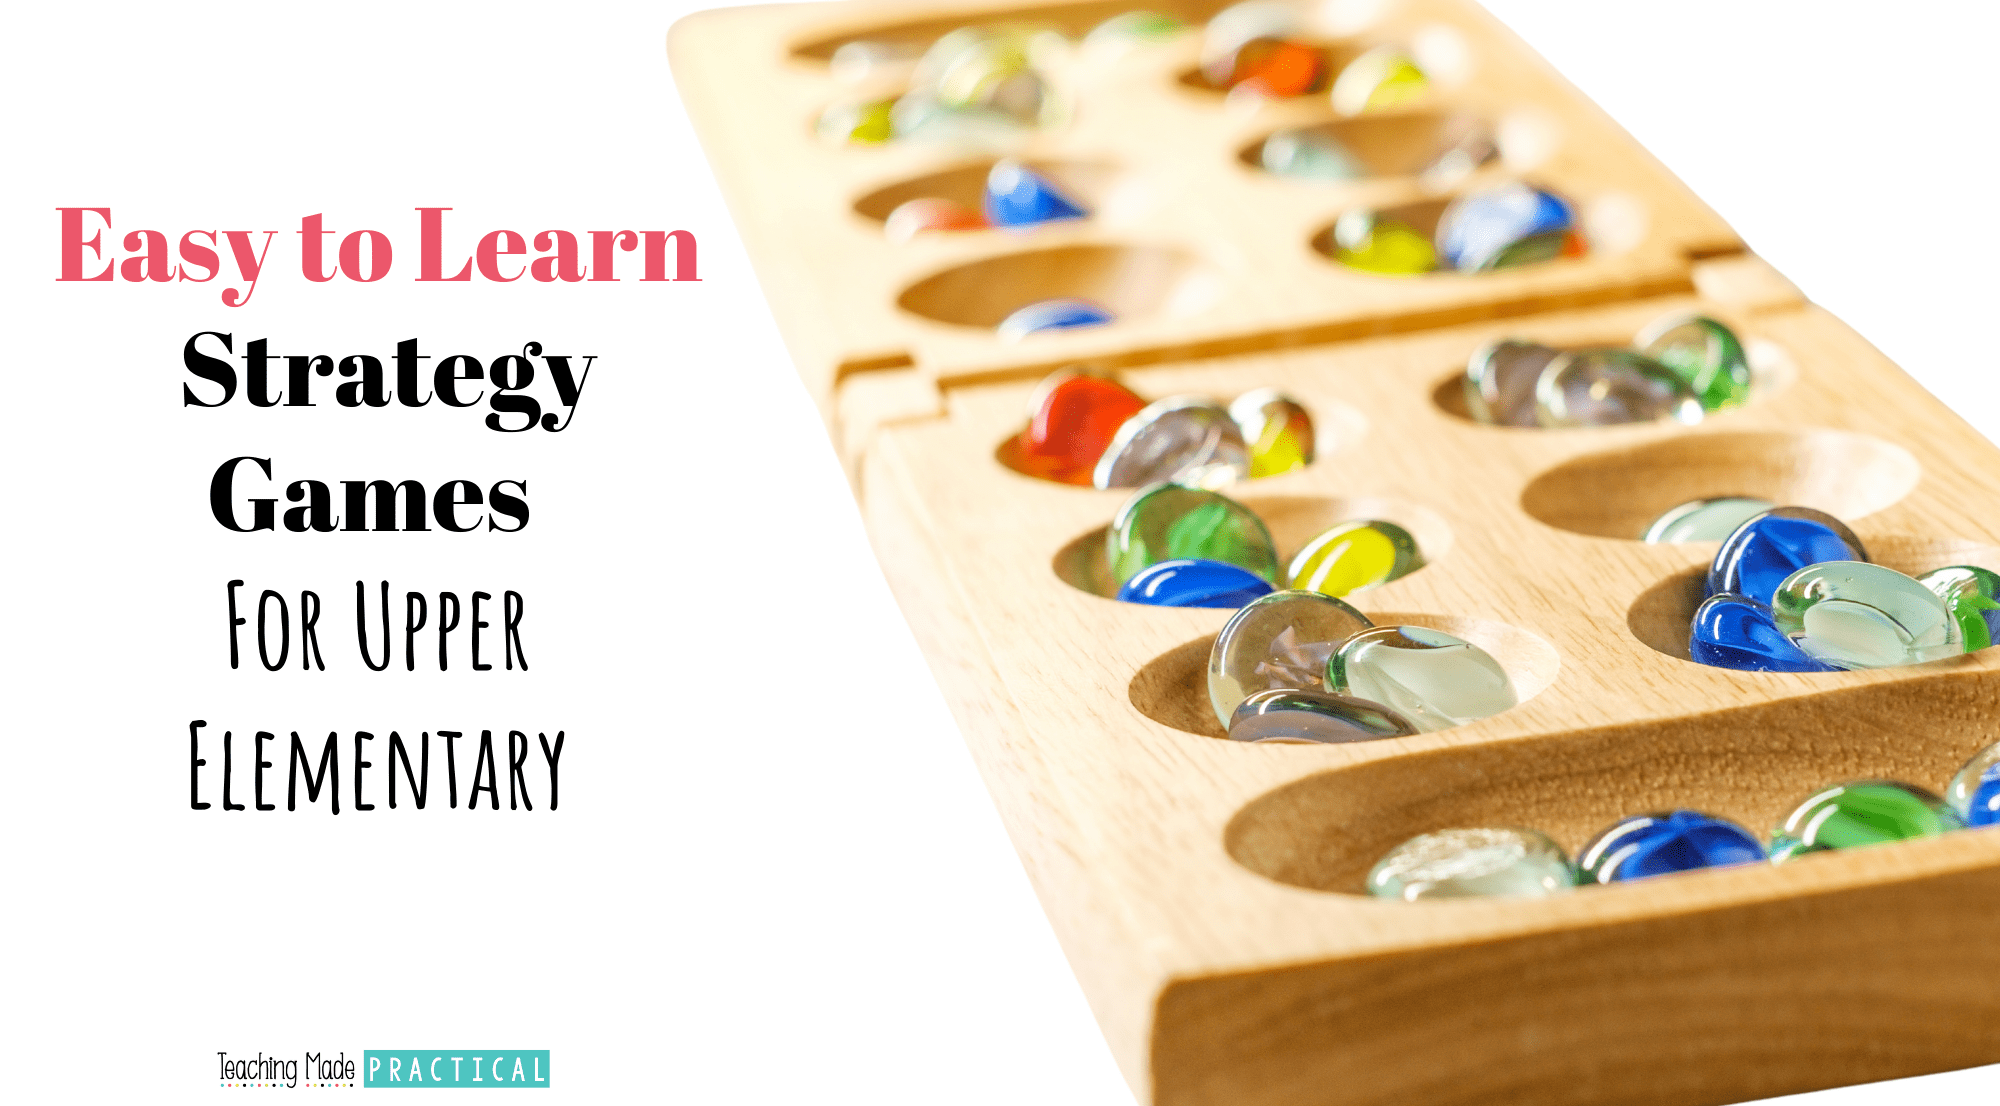 easy to learn strategy games that are great for Fun Fridays, indoor recess, game days in 3rd, 4th, and 5th grade